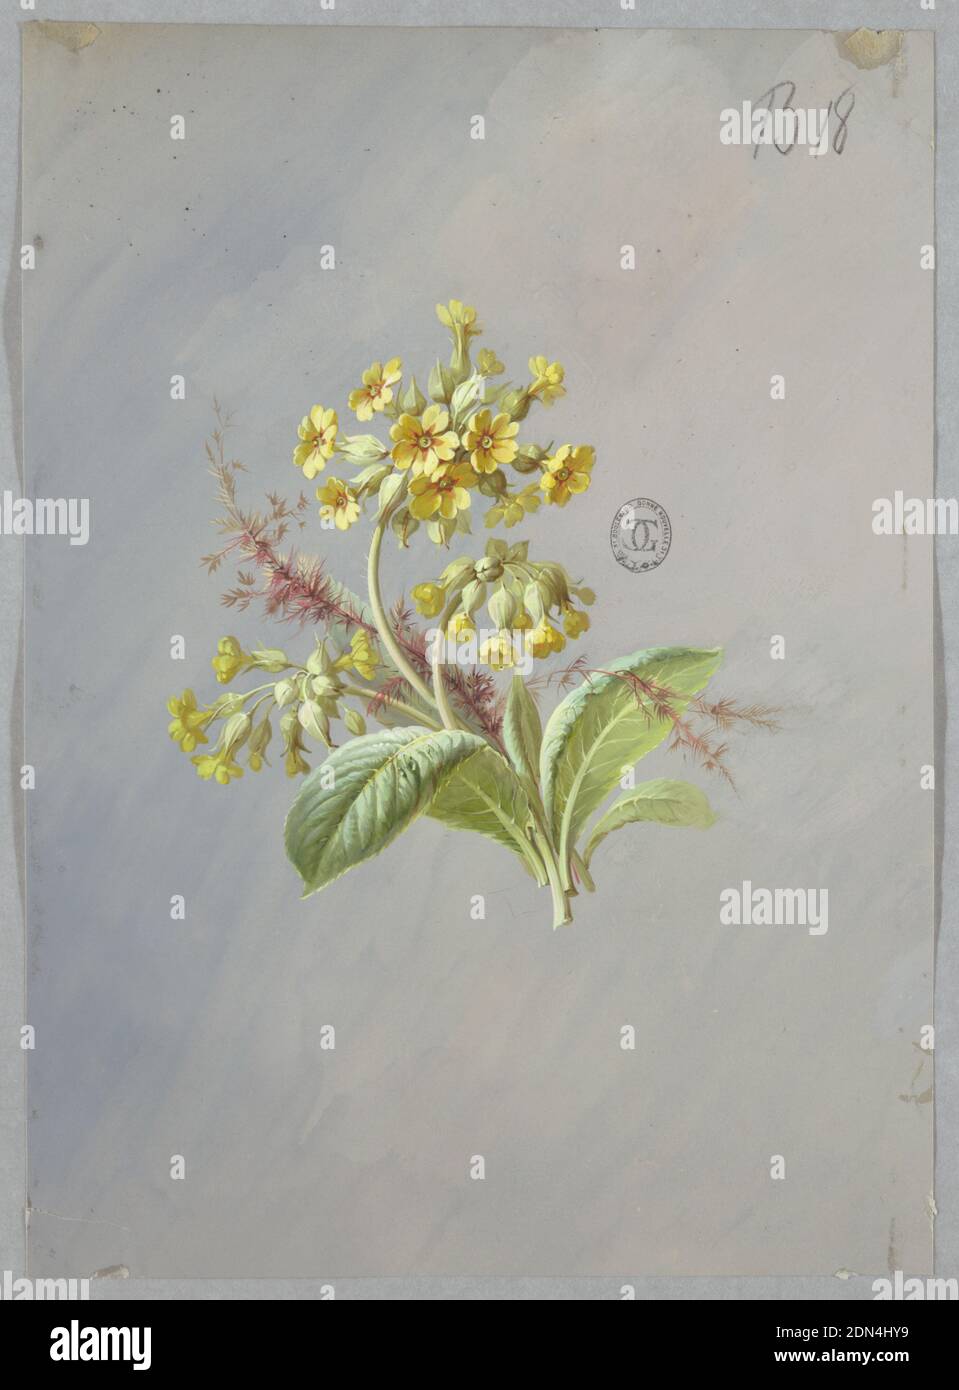 Design for Wallpaper and Textiles: Flowers, Brush and gouache on light blue paper, At center of page three clusters of yellow flowers with foliage at base. Behind flowers, two stems of brown foliage., France, 19th century, wallpaper designs, Drawing Stock Photo